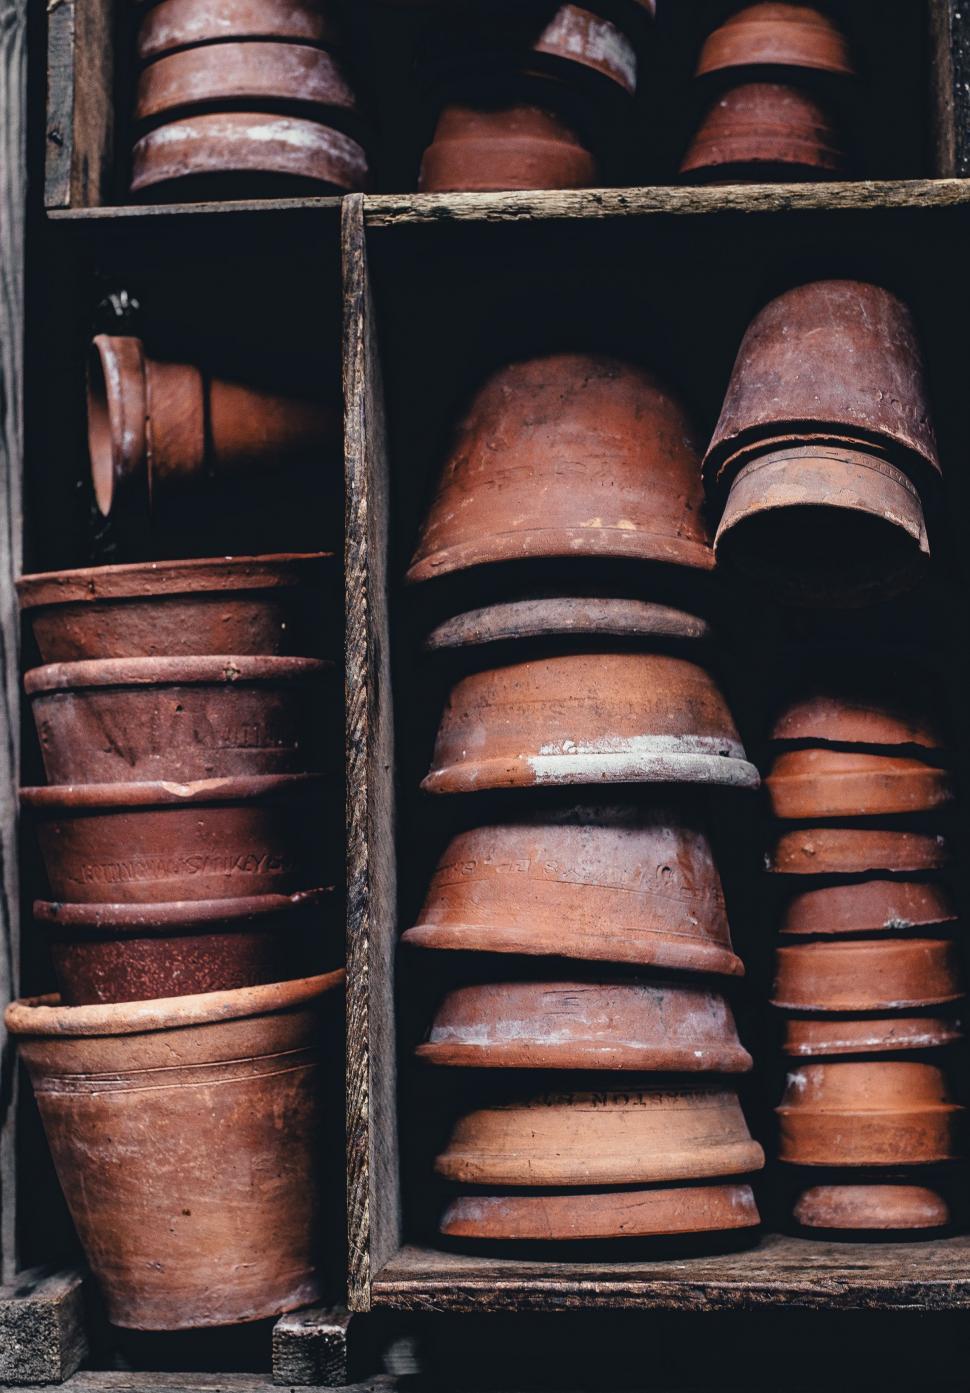 Free Image of Clay Flower Pots in Wooden Shelves  